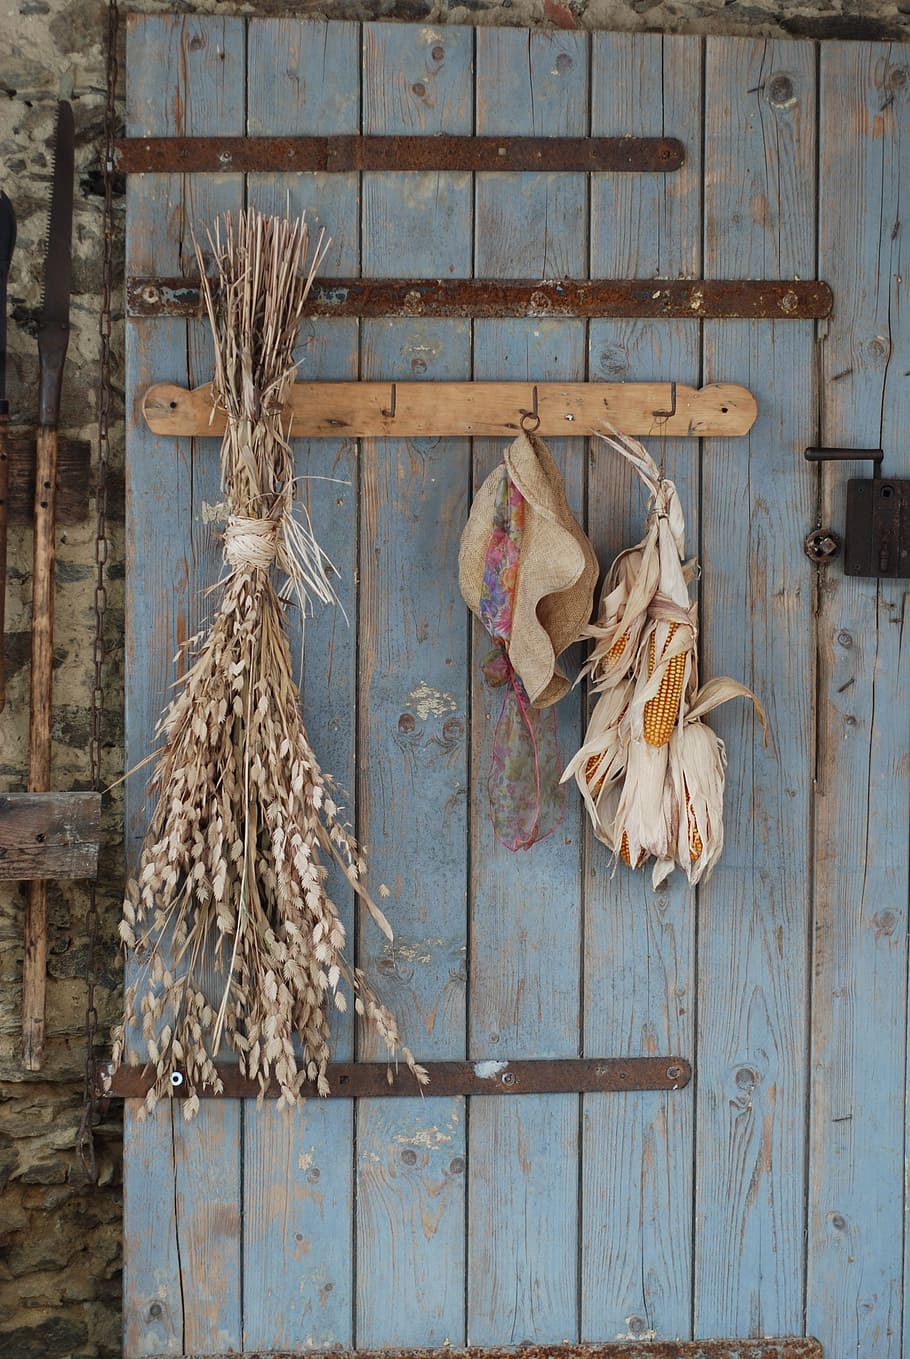 Folklore, Village, Open Air Museum, Folk, old house, the idyll, farm, corn, hanging, wood - material